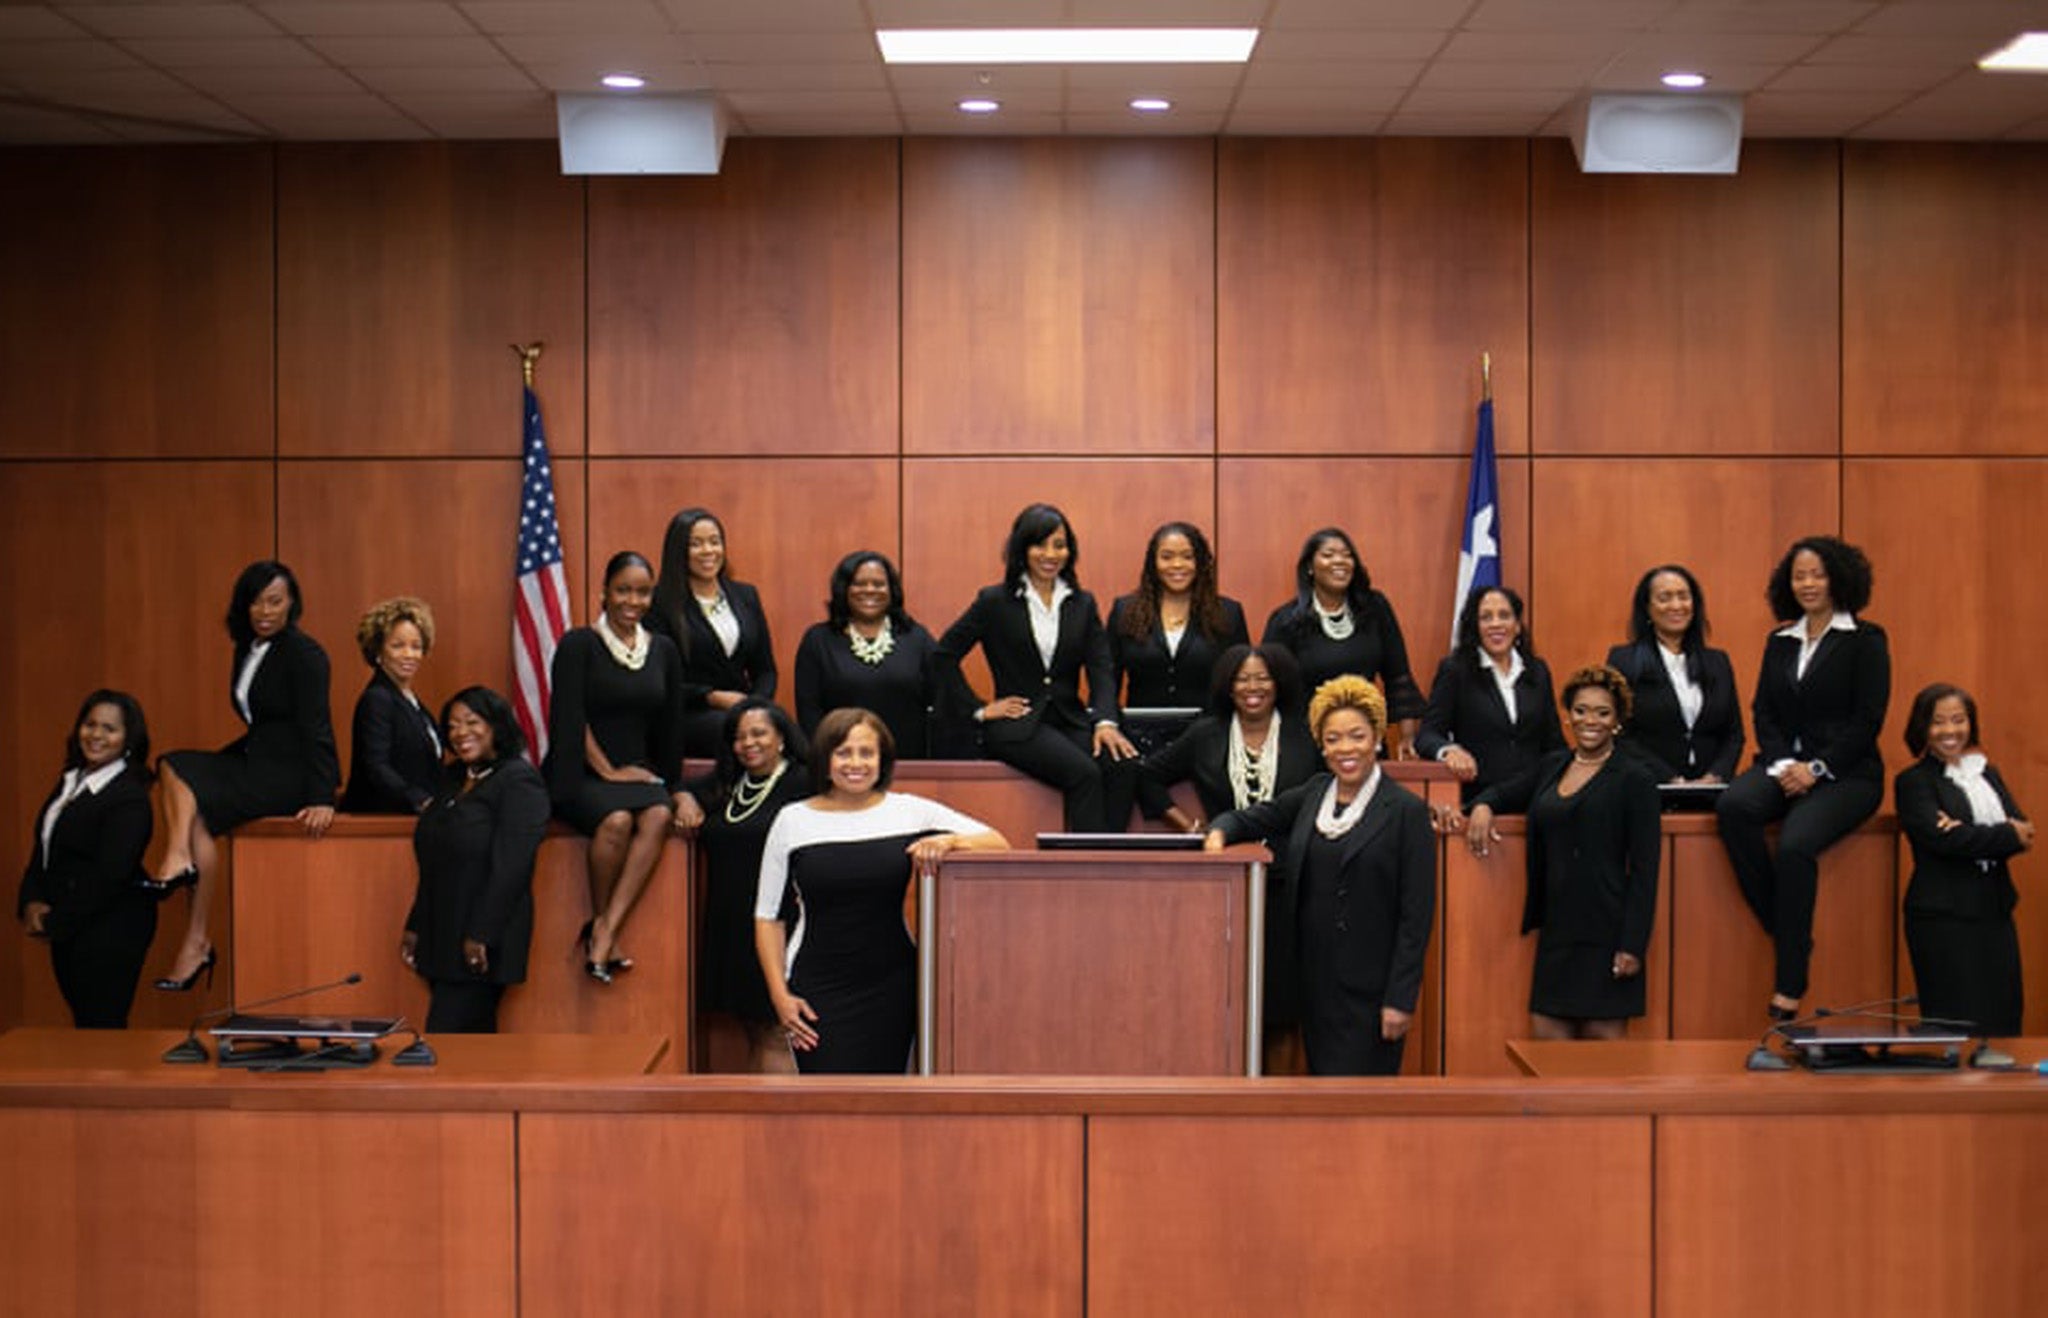 The 'Black Girl Magic' campaign was set up to broaden the diversity of the Houston area's judiciary